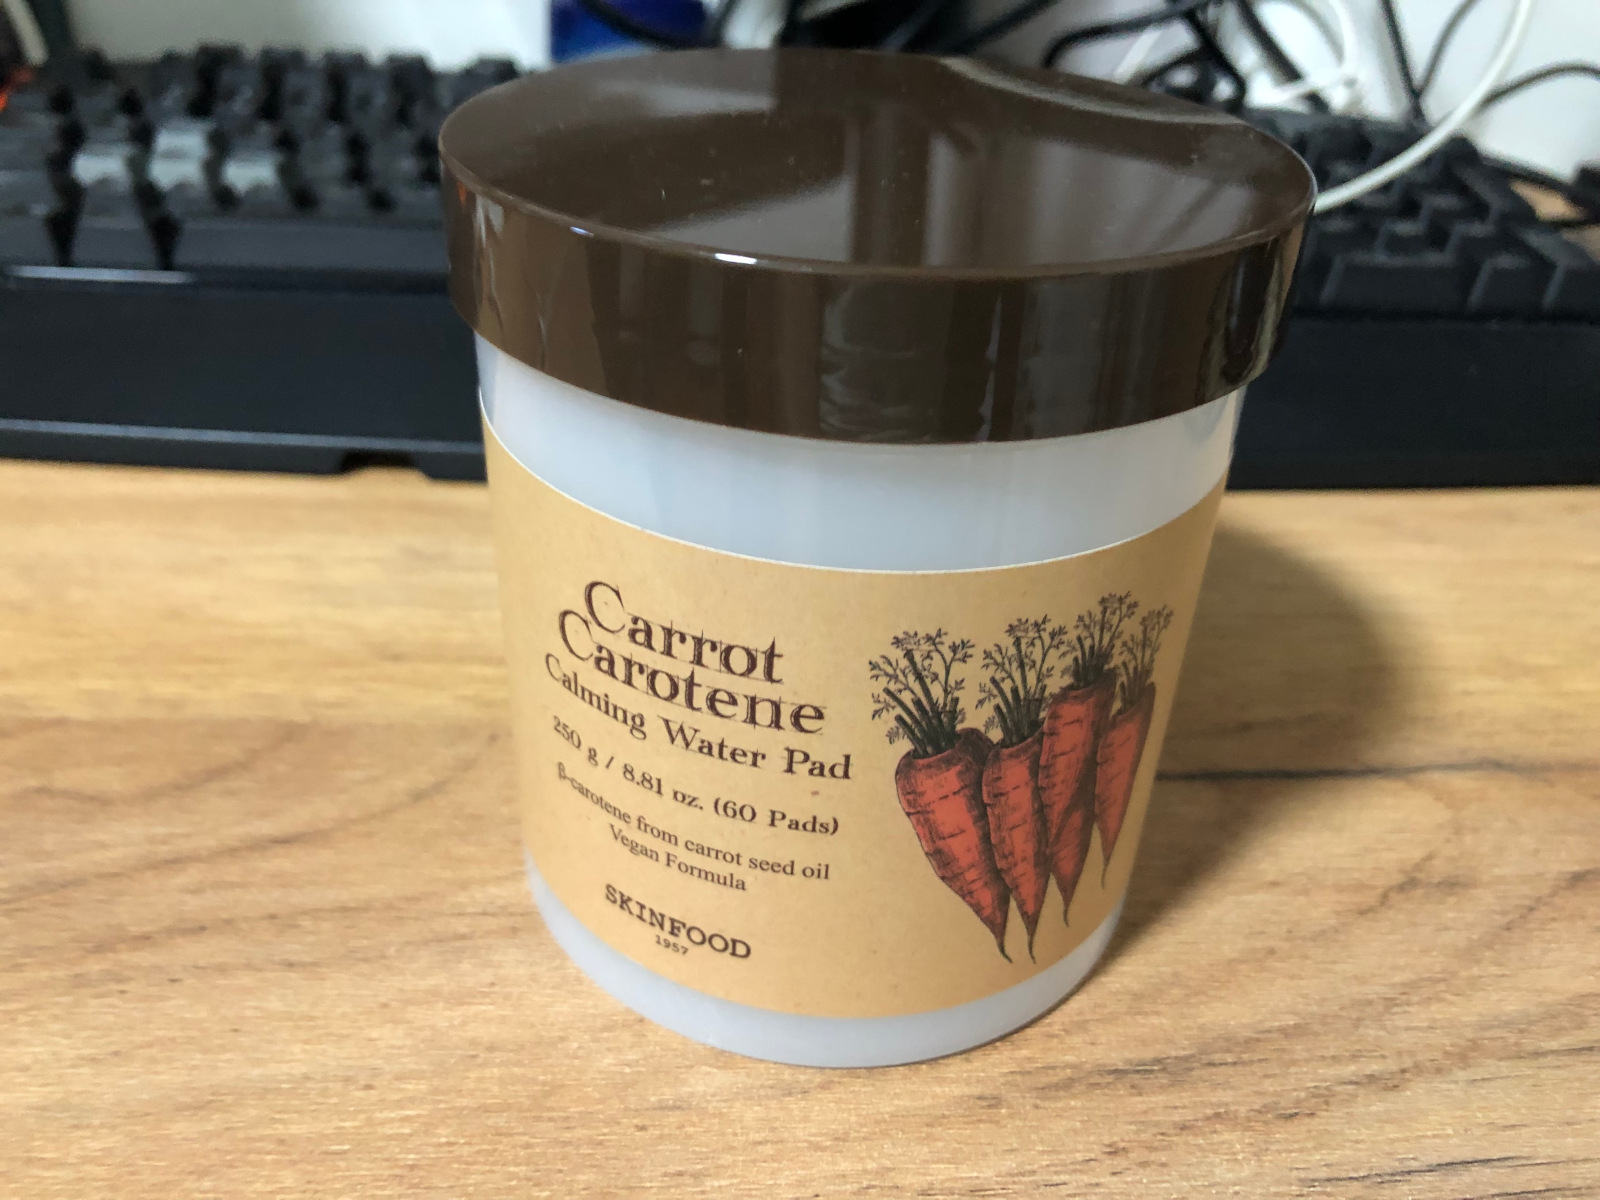 Empty Carrot Carotene Calming Water Pad container